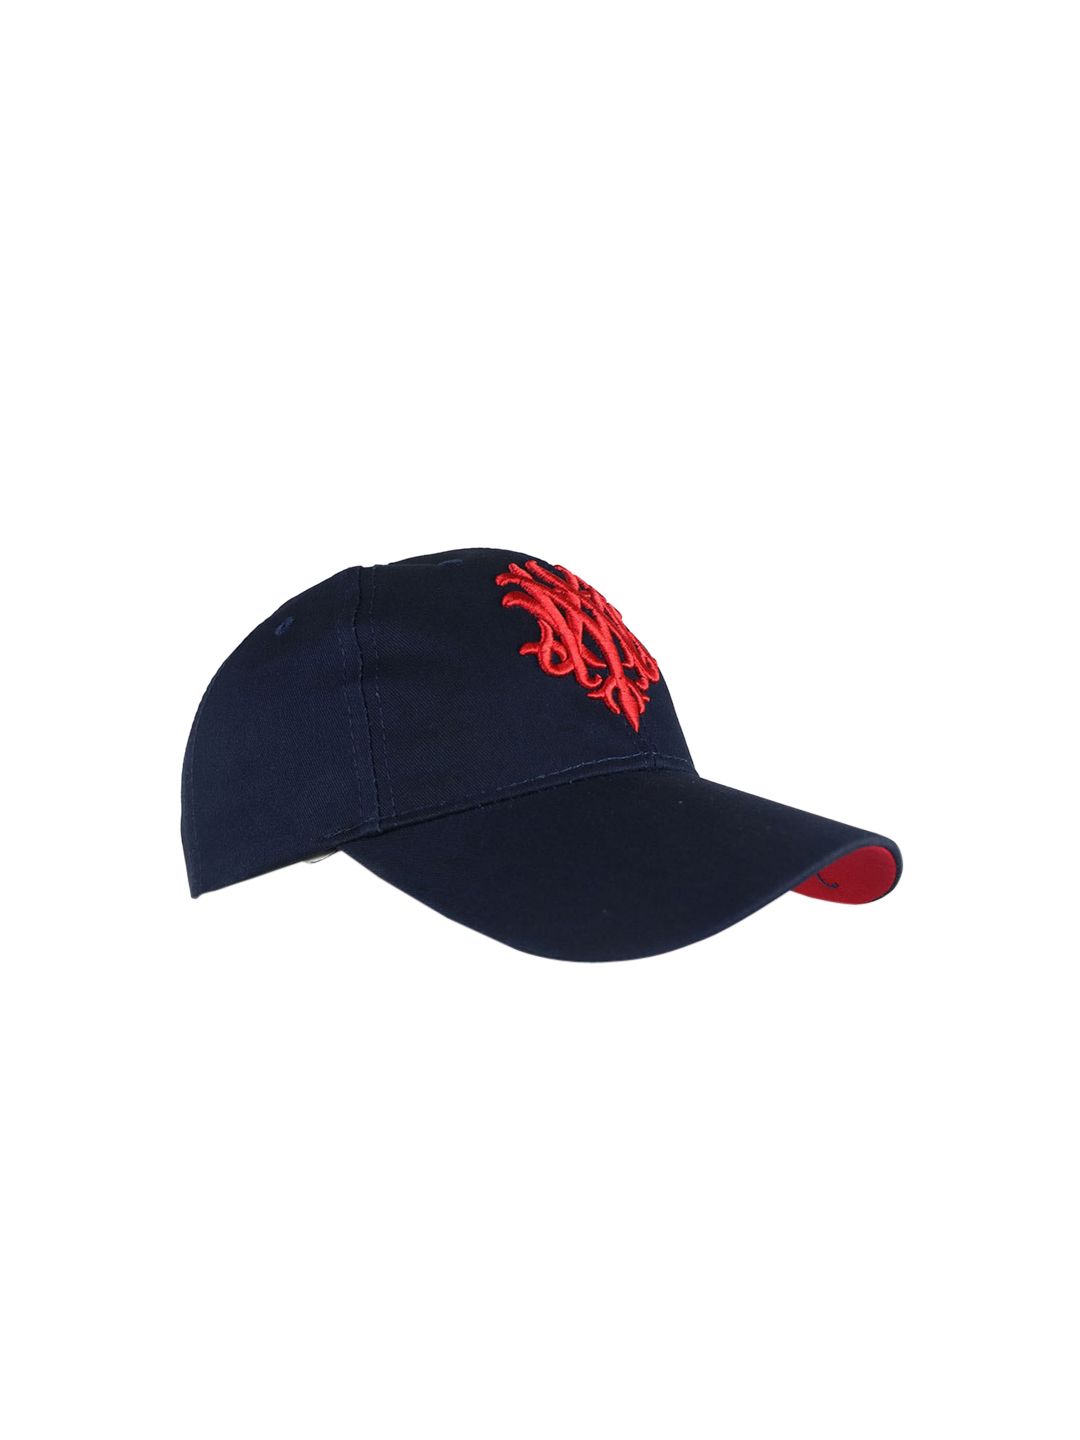 iSWEVEN Unisex Blue & Red Embroidered Adjustable Snapback Cap Price in India